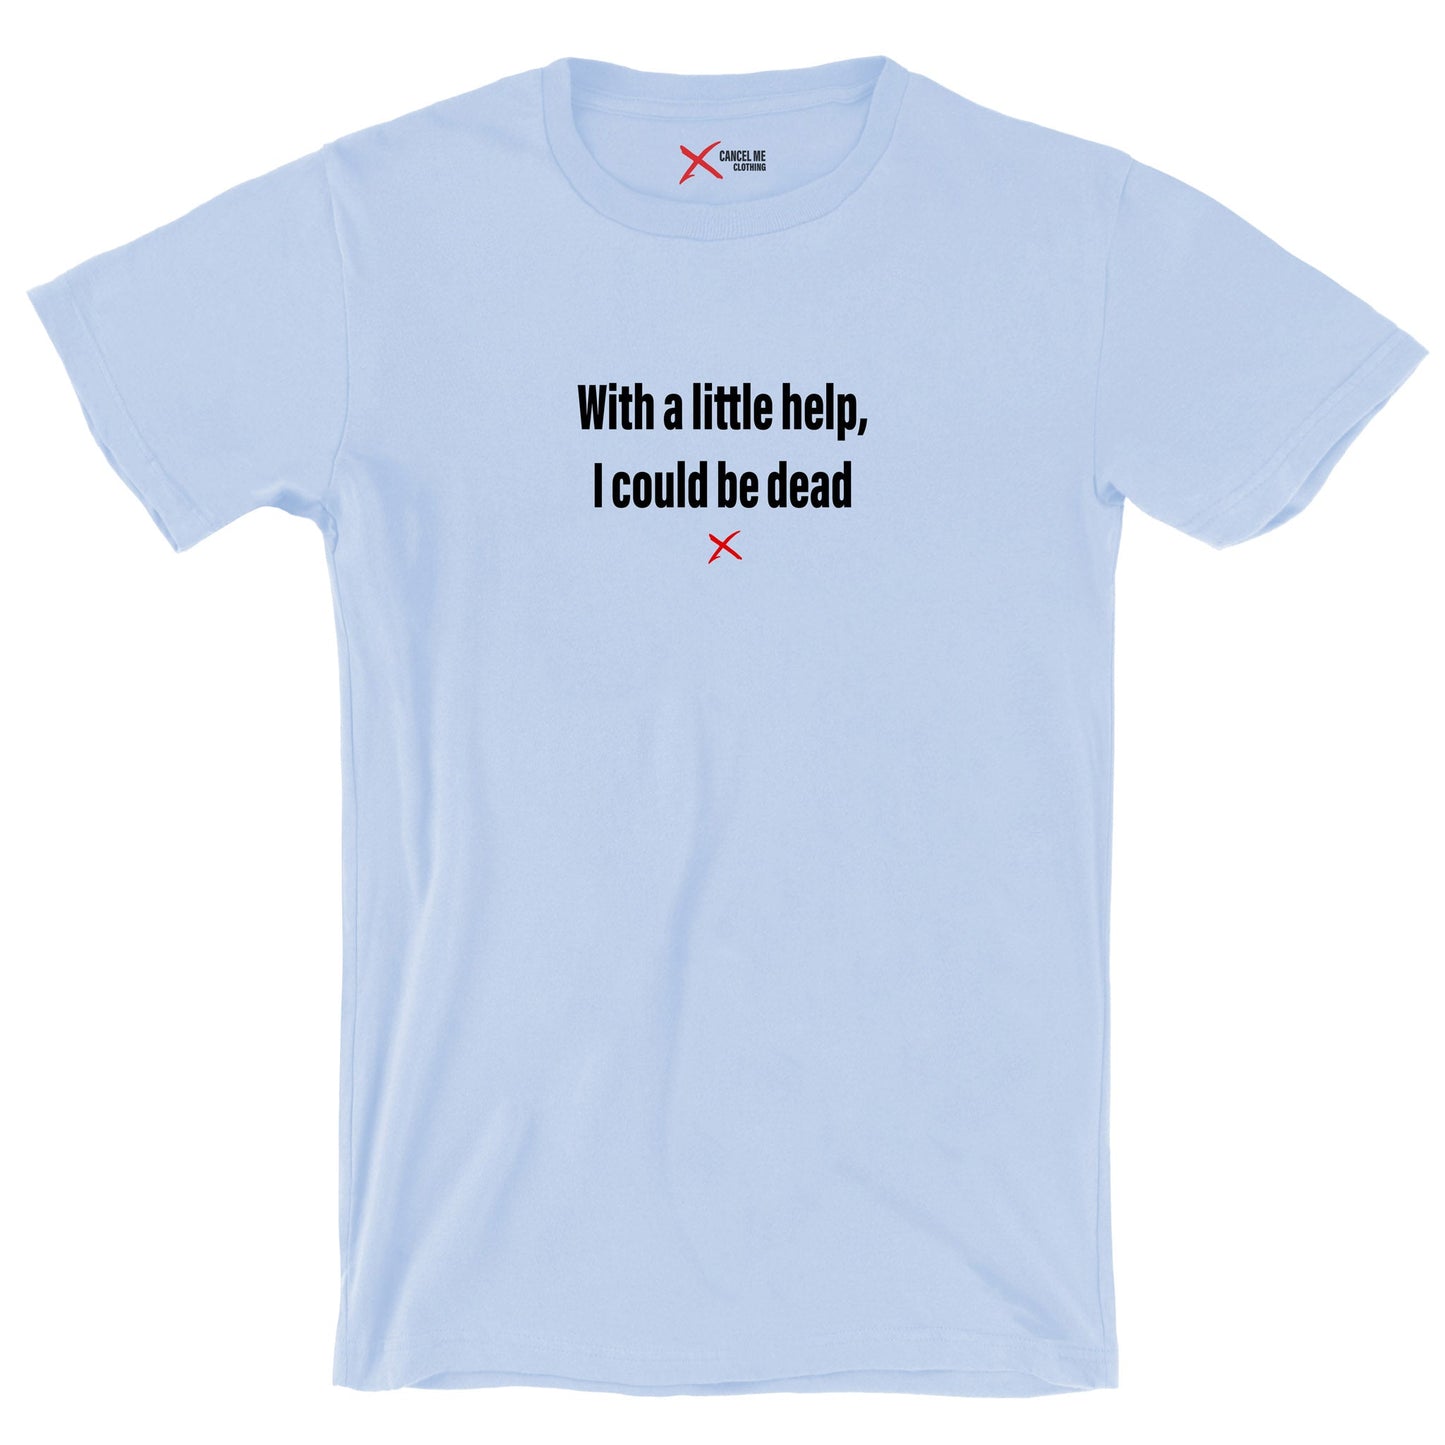 With a little help, I could be dead - Shirt